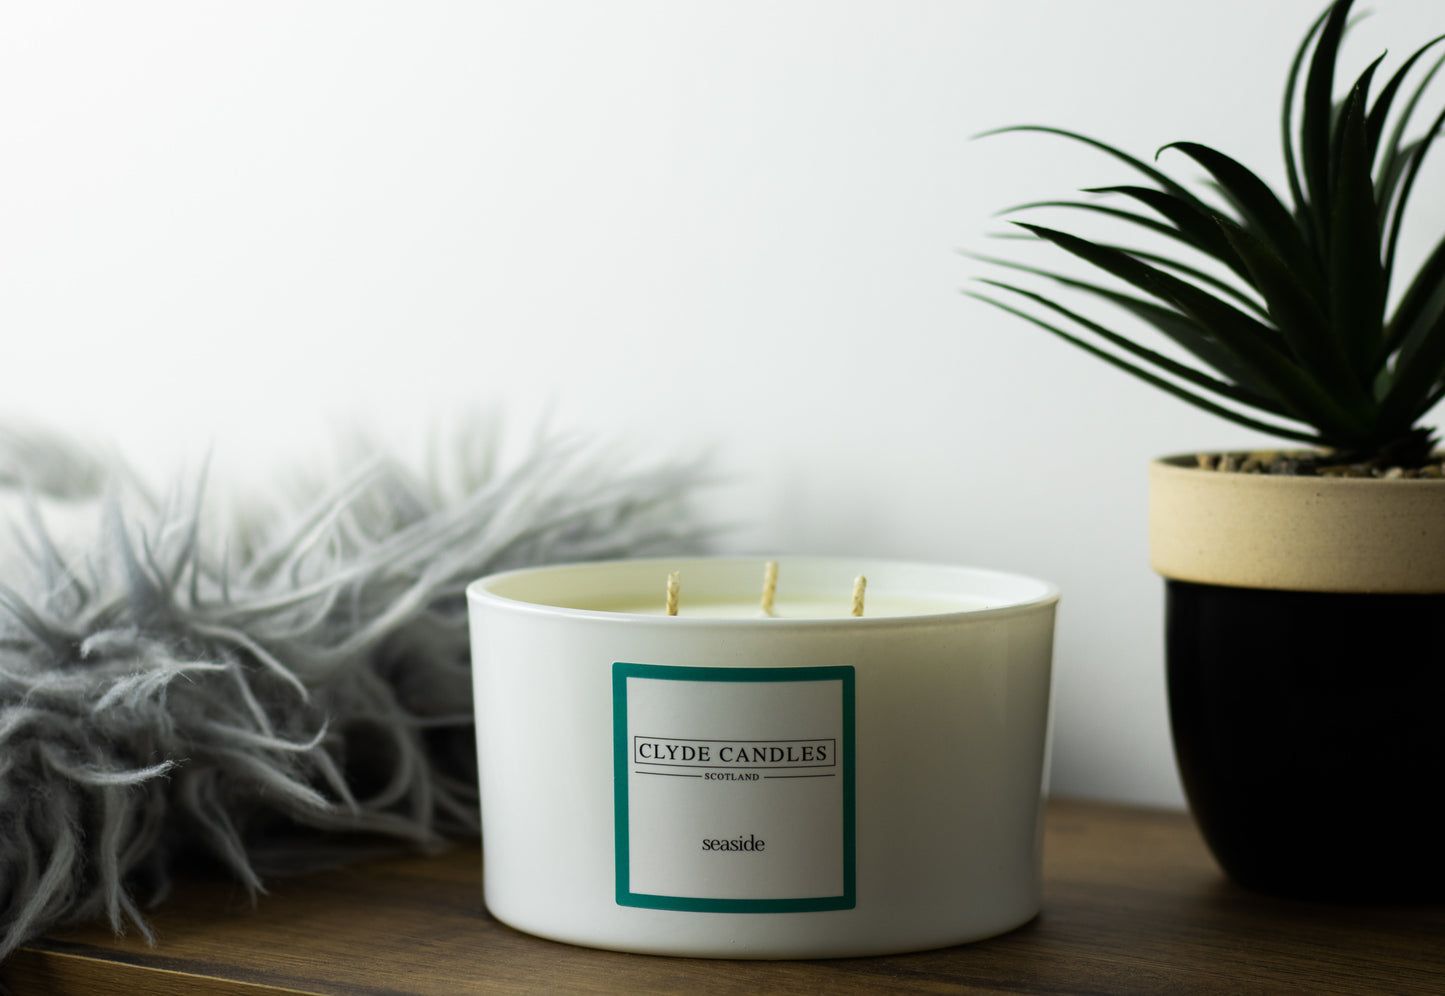 seaside three wicks natural soy wax clyde candles, scottish made luxury gifts, sea salt algae